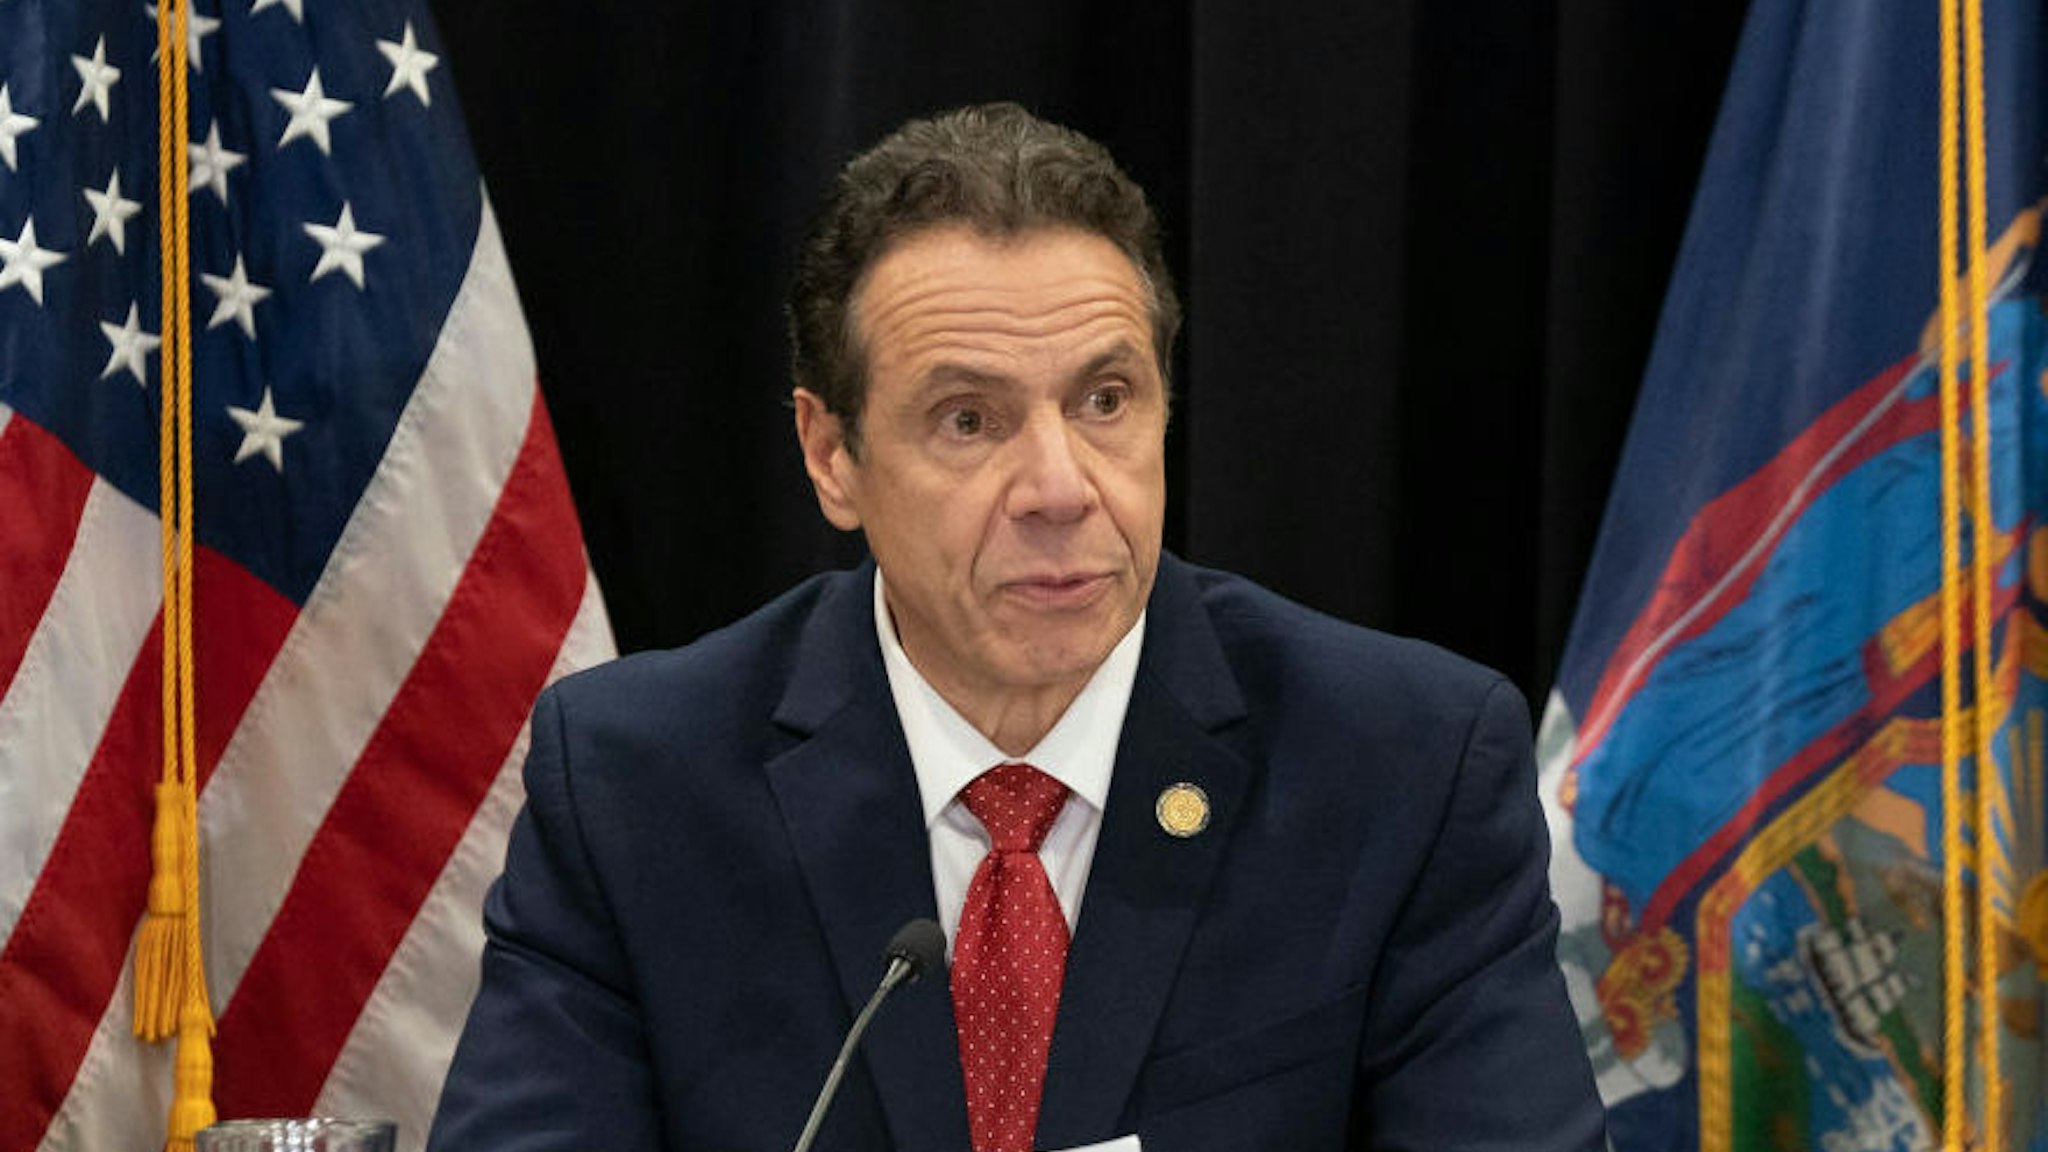 New York State Governor Andrew Cuomo briefing on updates on spread of covid-19 in New York State at NYPA White Plains Office. (Photo by Lev Radin/Pacific Press/LightRocket via Getty Images)